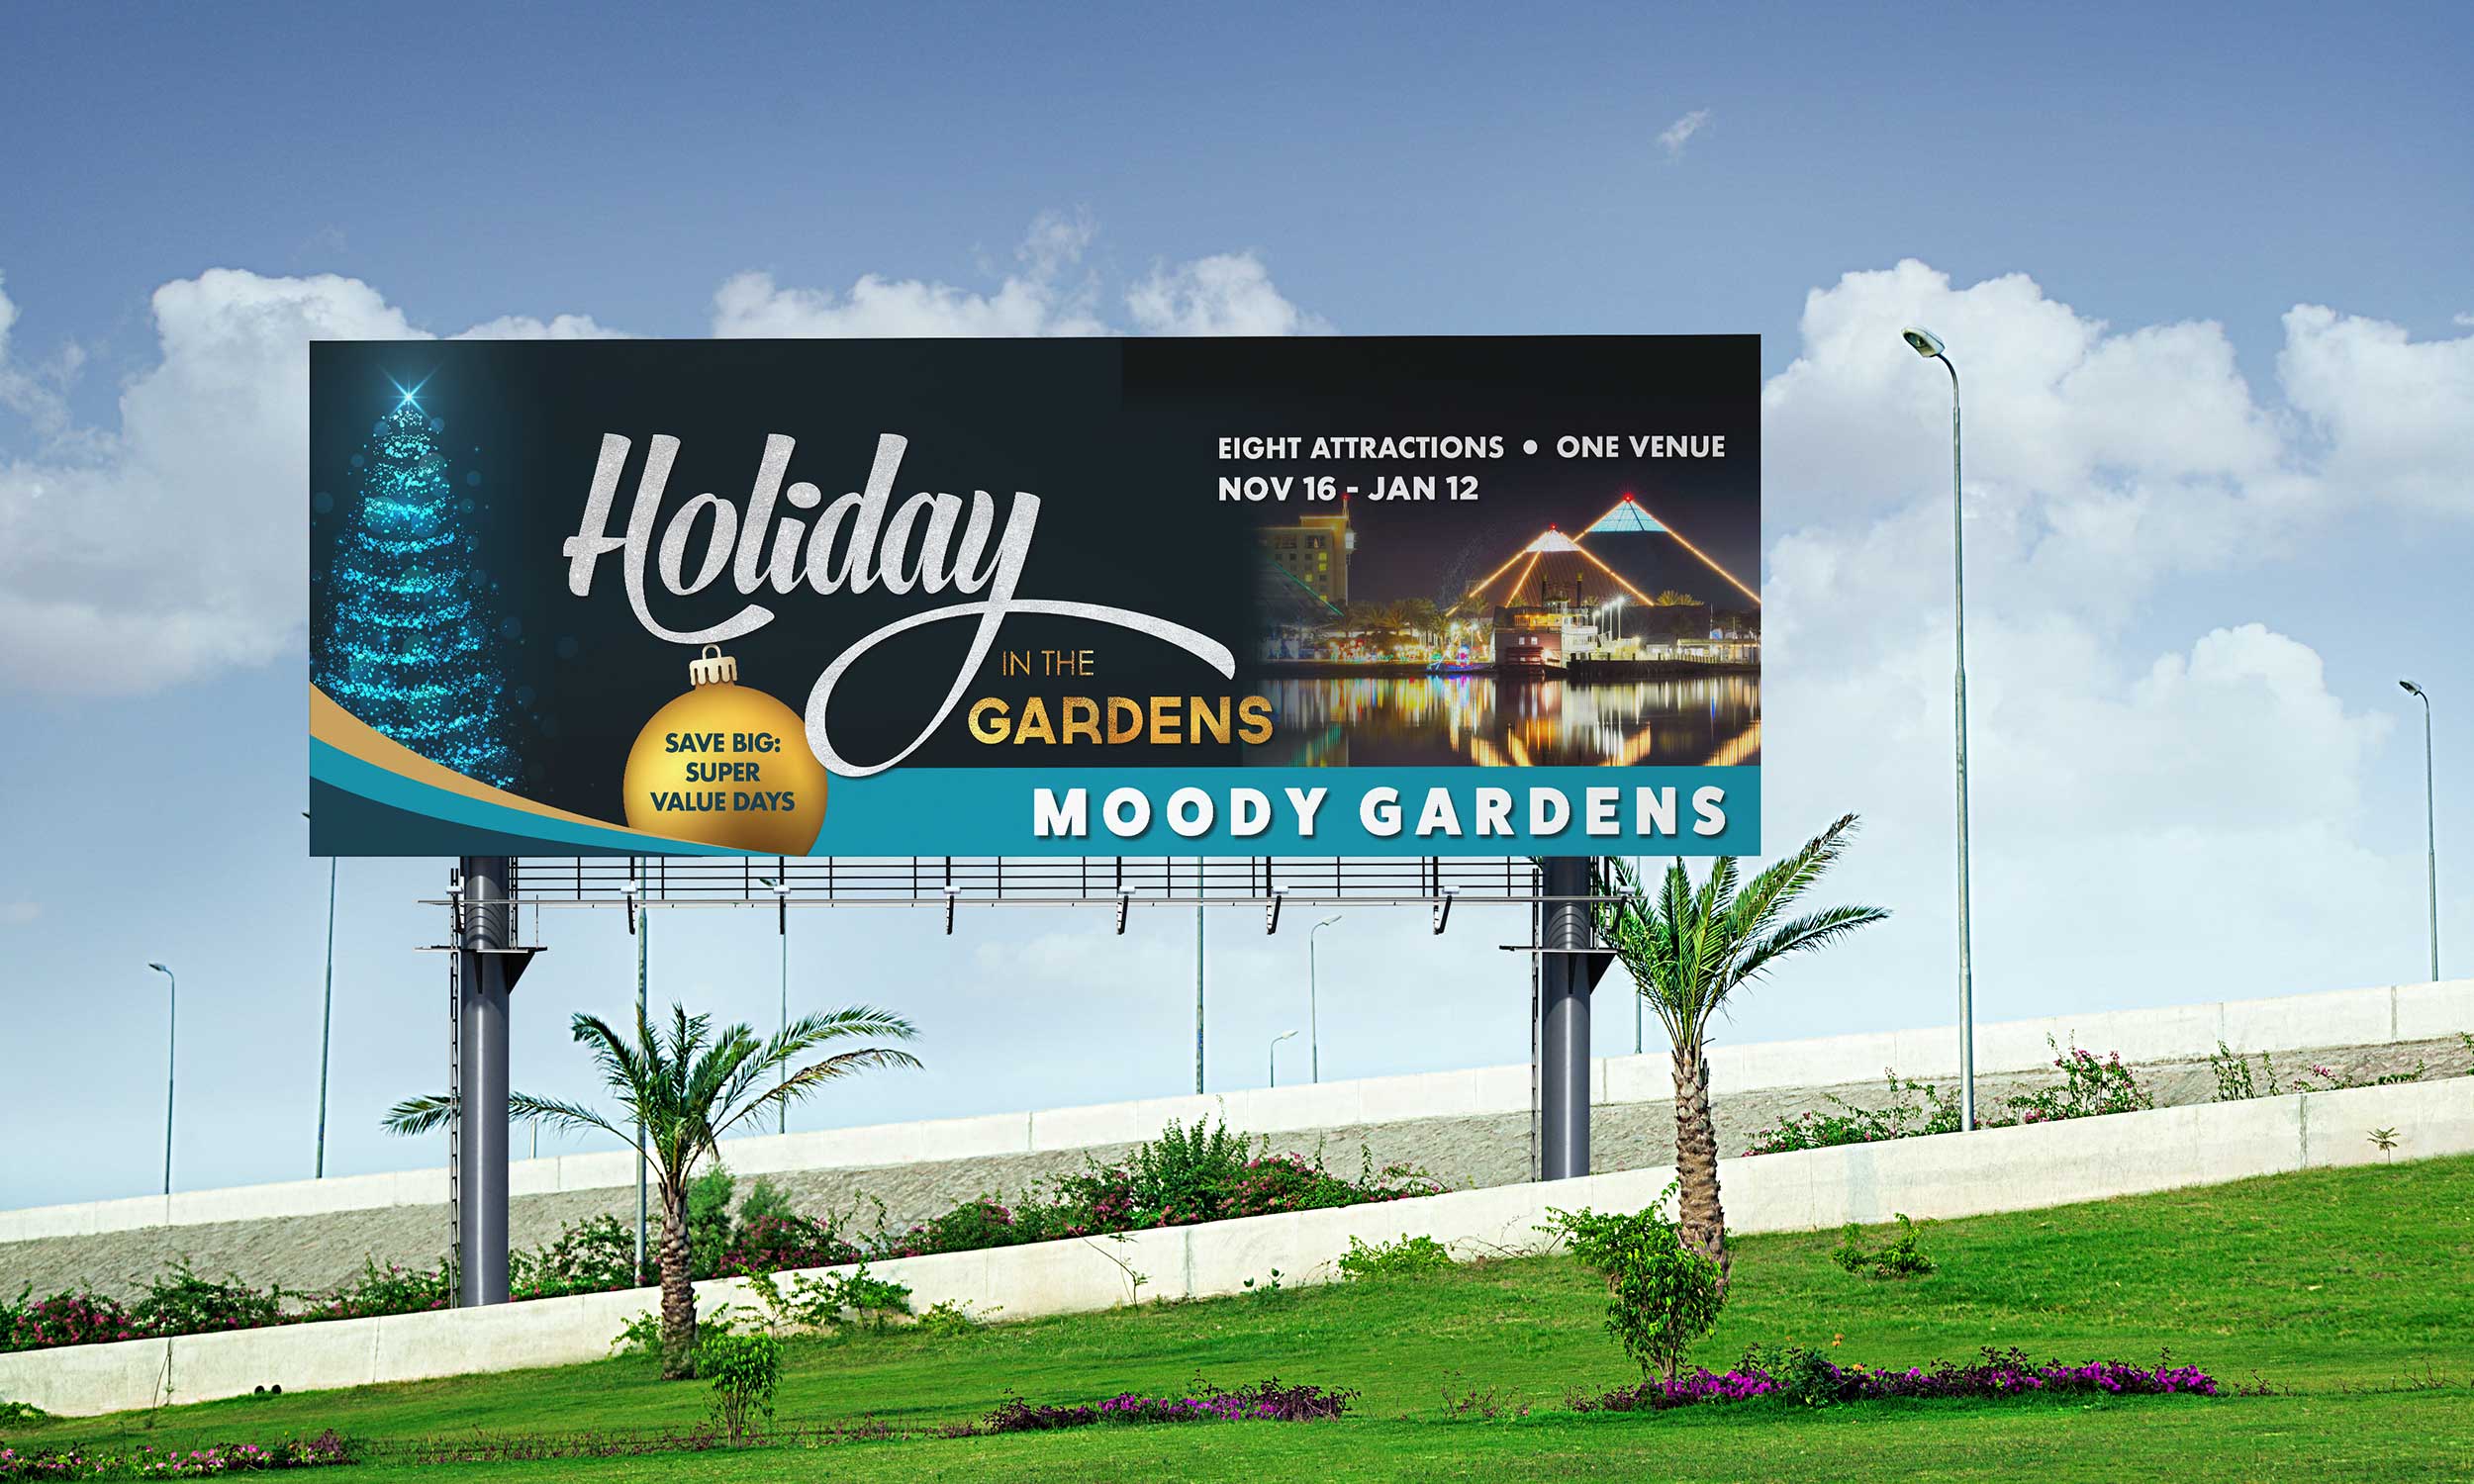 Billboard Design for Moody Gardens, Holiday in the Gardens Events